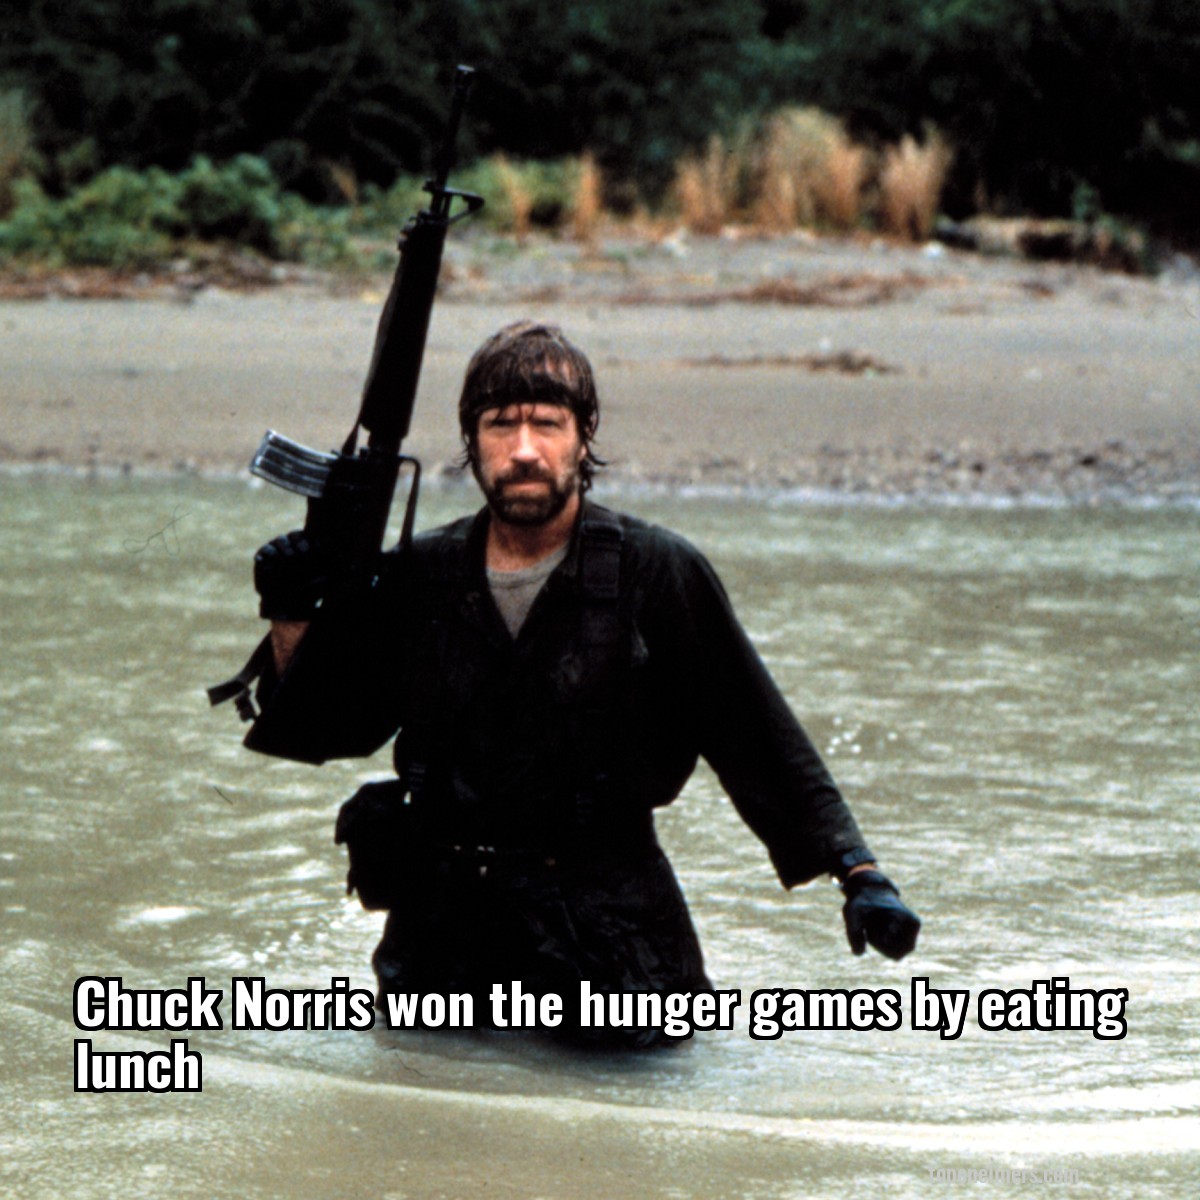 Chuck Norris won the hunger games by eating lunch